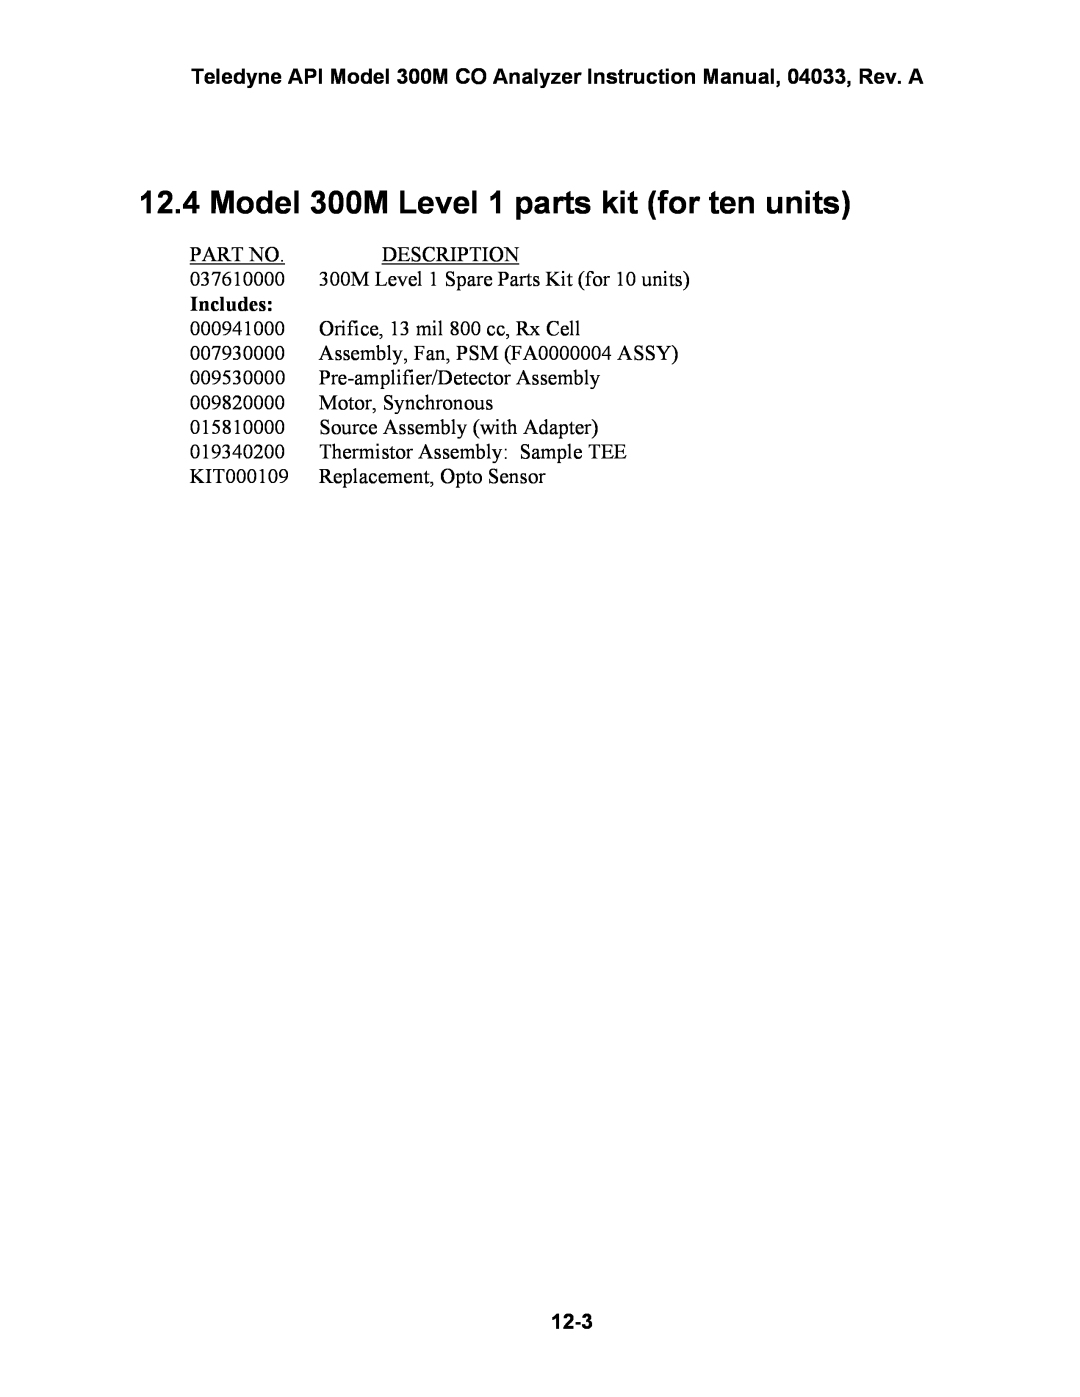 Teledyne instruction manual Model 300M Level 1 parts kit for ten units, 12-3, Includes 